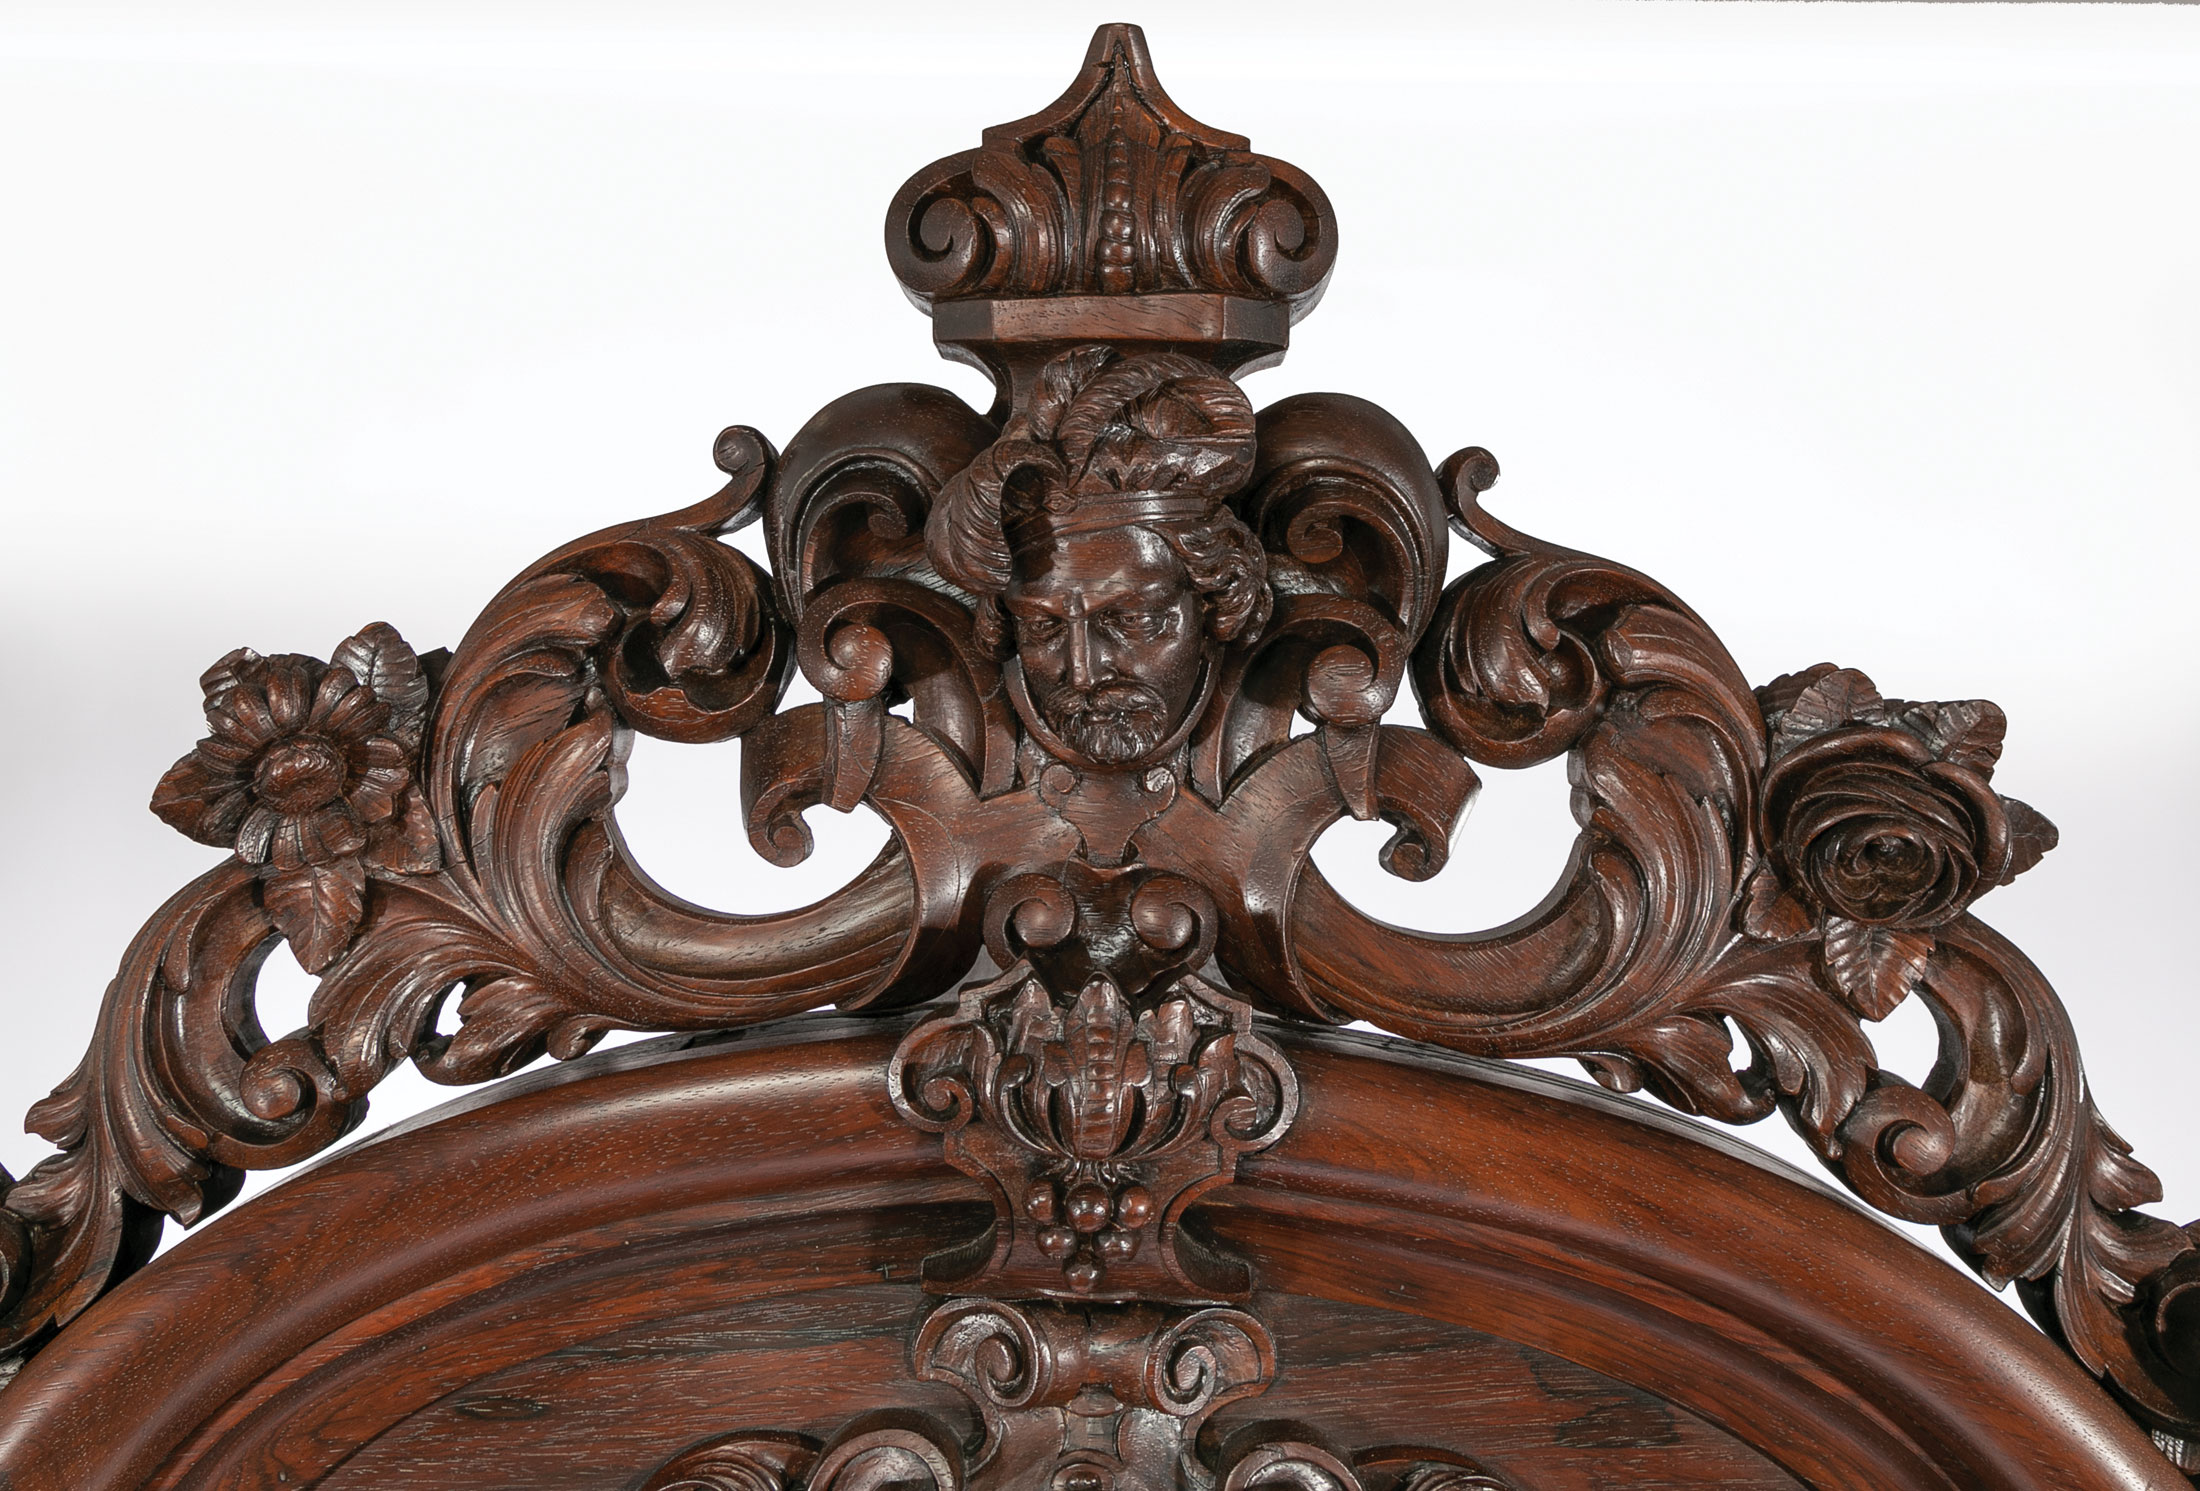 Very Fine American Carved Rosewood Bedroom Suite , mid-19th c., labeled A. (Alexander) Roux, incl. - Image 11 of 20